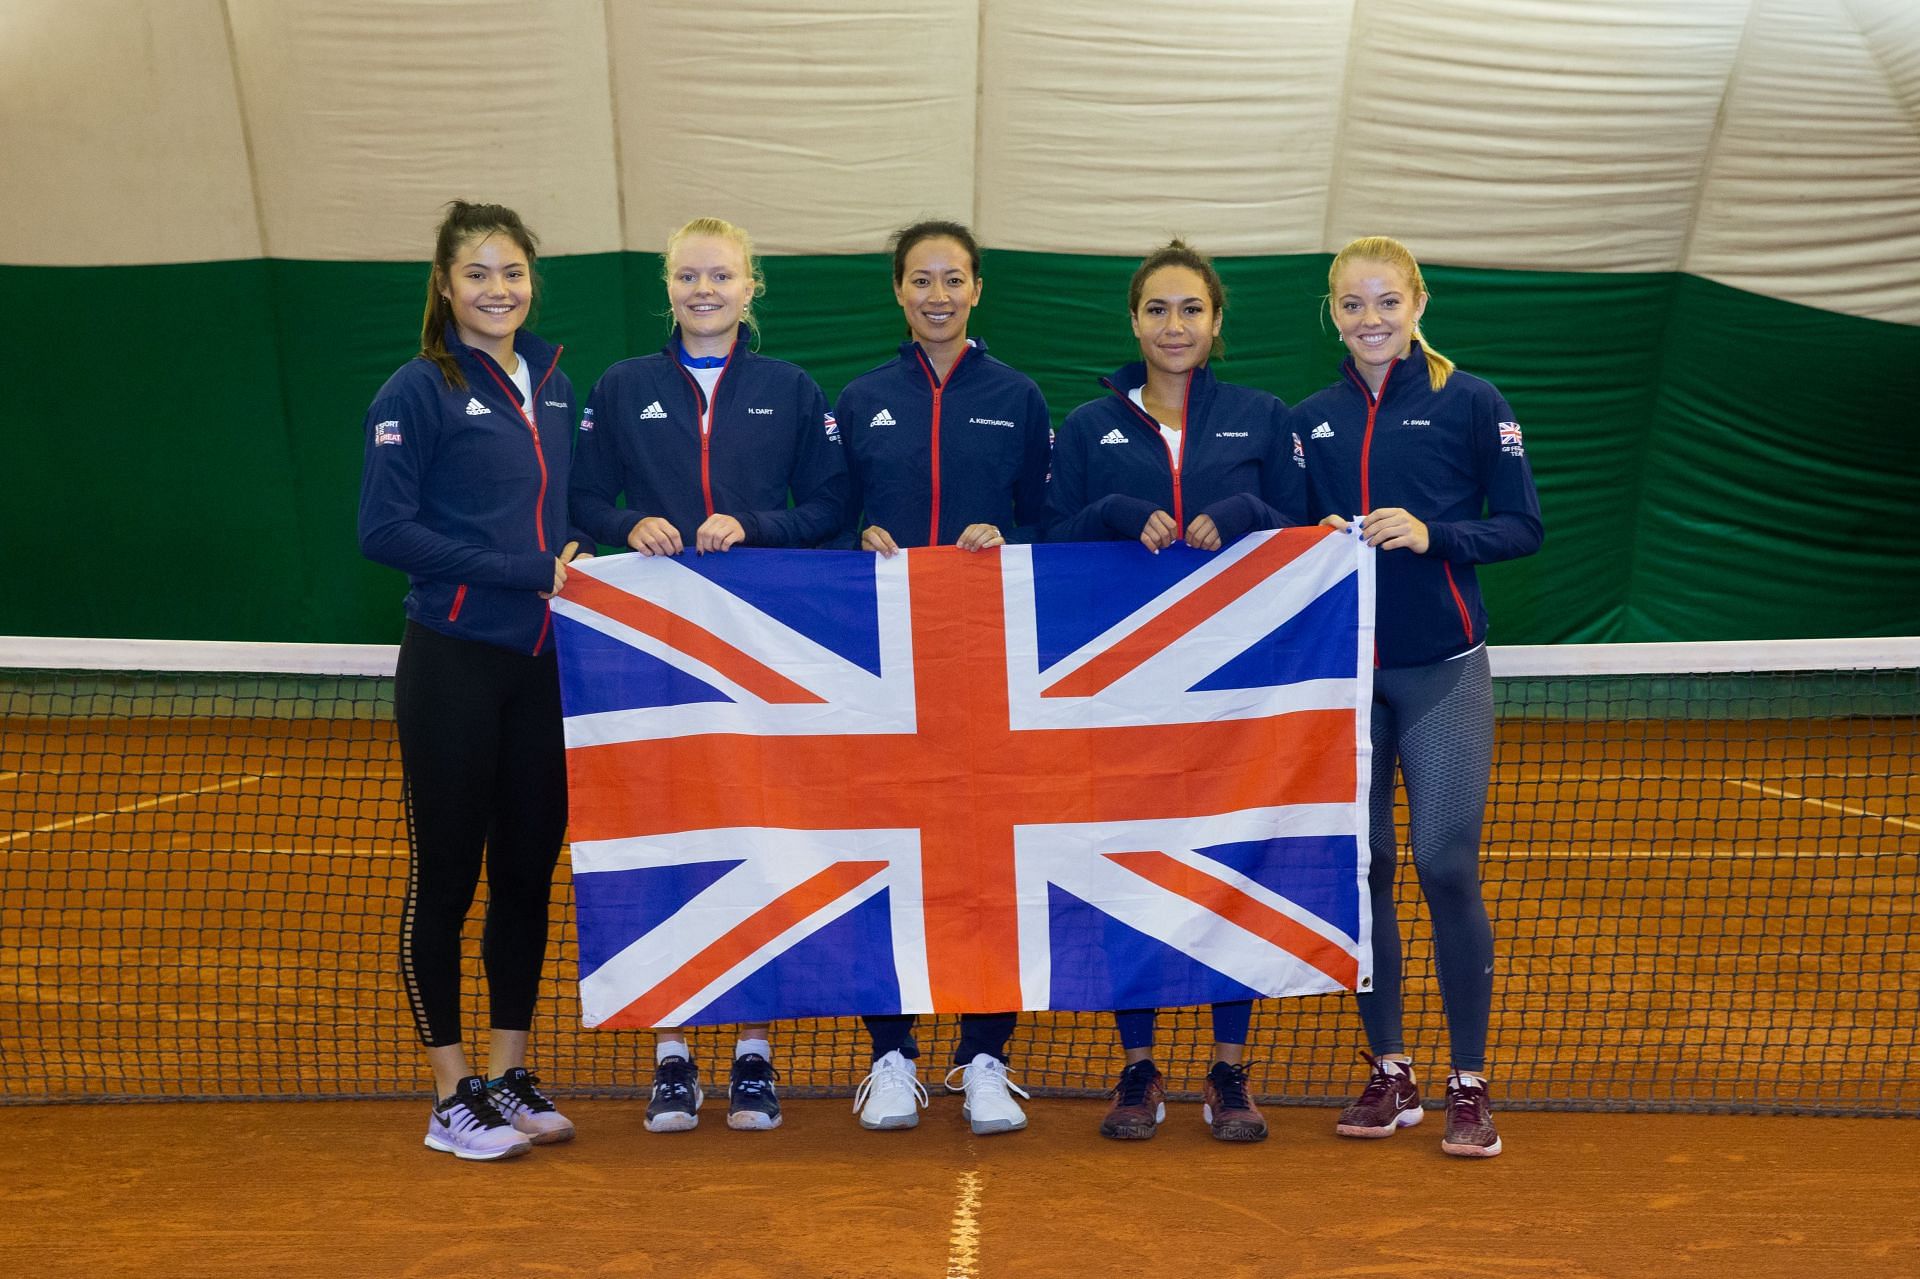 Emma Raducanu (L) with the Great Britain Fed Cup team